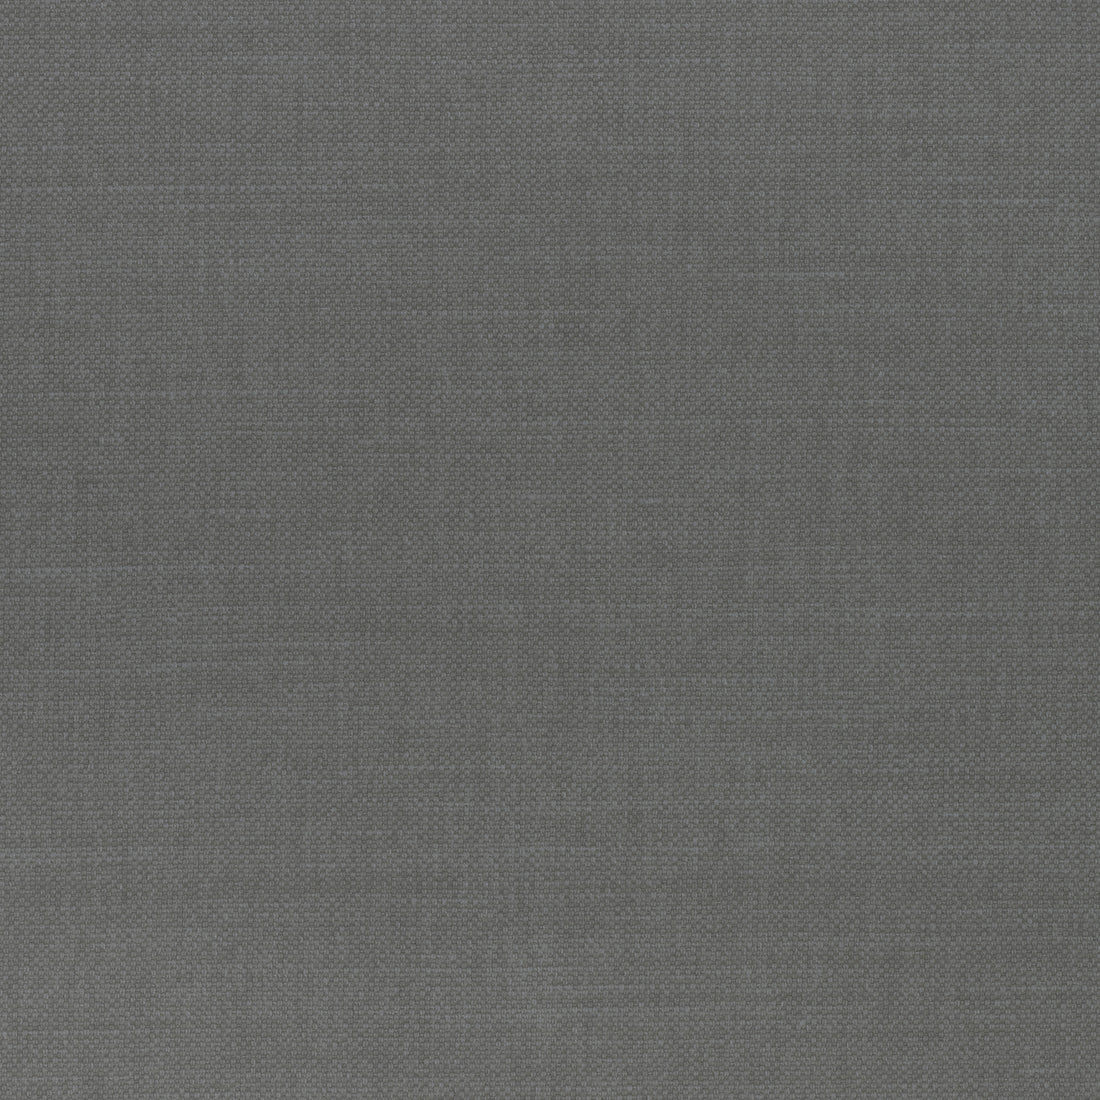 Prisma fabric in charcoal color - pattern number W70113 - by Thibaut in the Woven Resource Vol 12 Prisma Fabrics collection